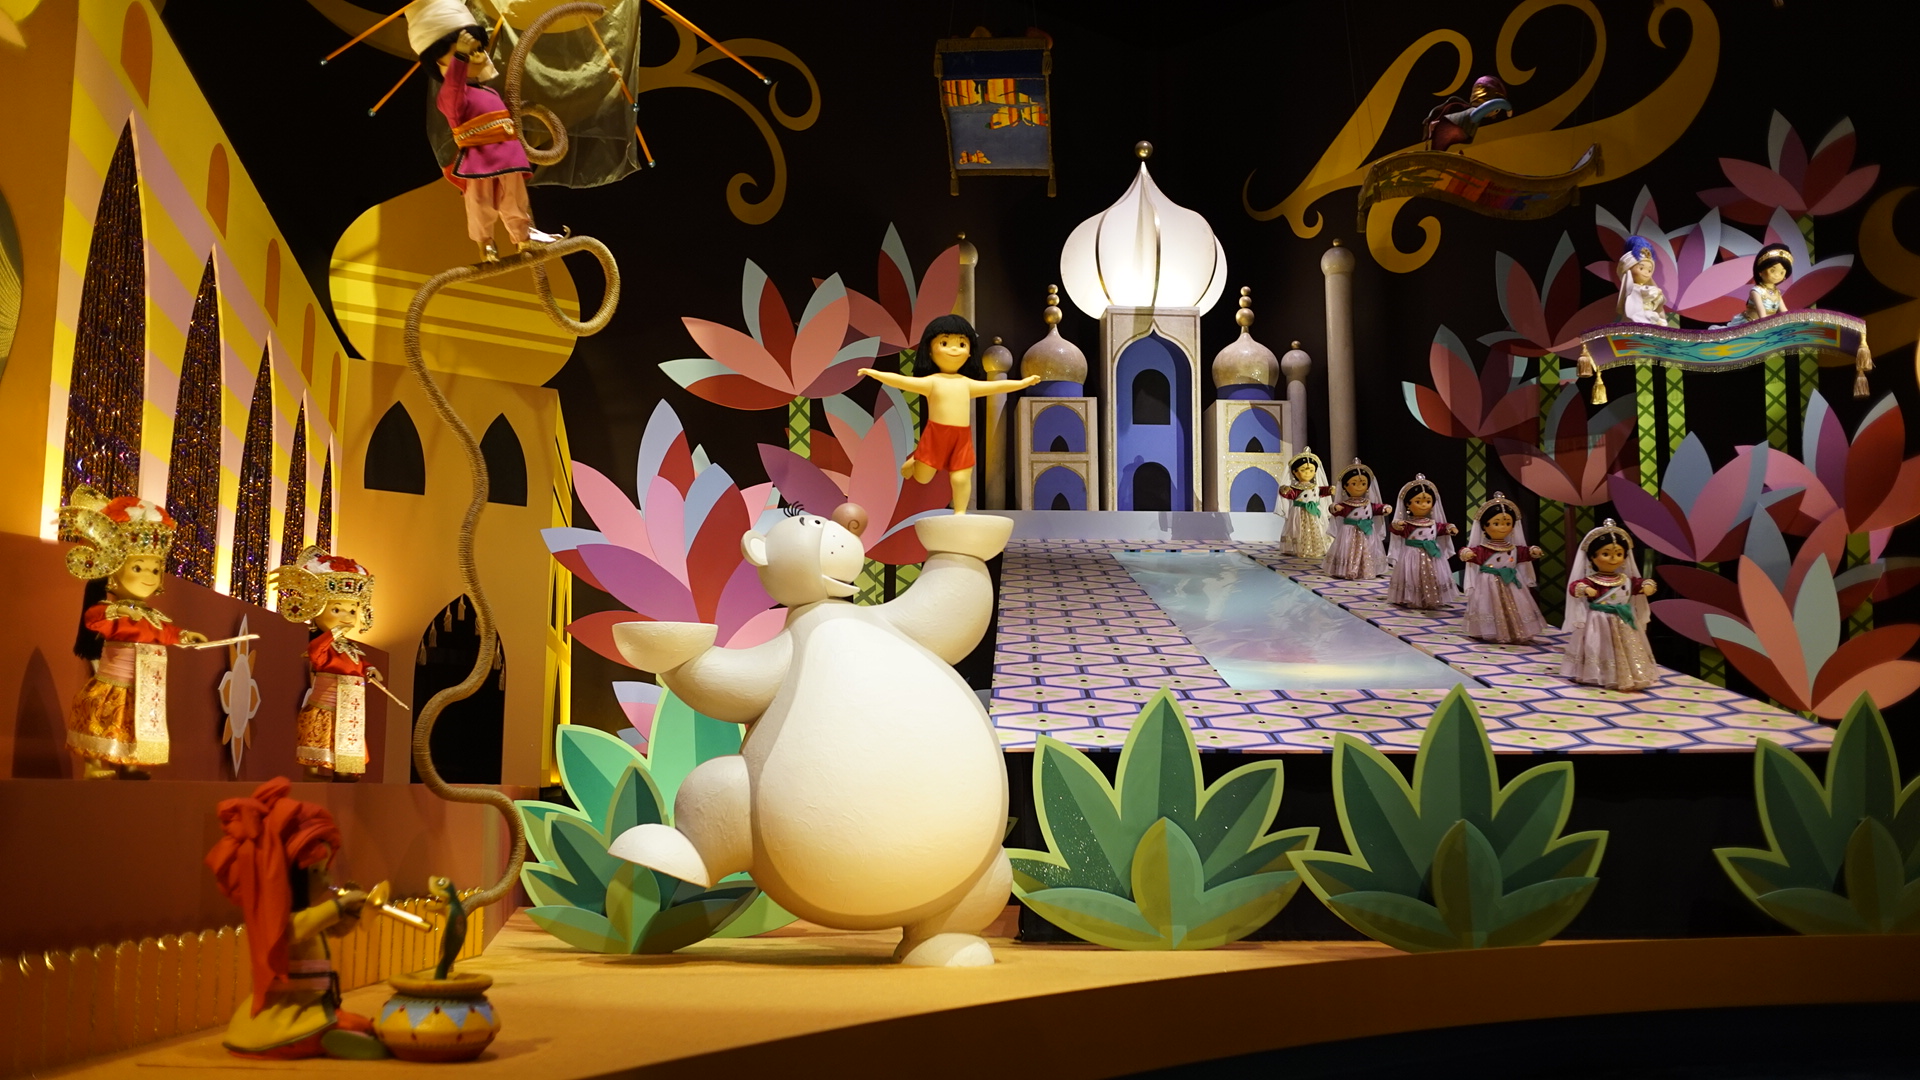 It S A Small World At Magic Kingdom Adding Disney Characters To The Attraction For Walt Disney World S 50th Anniversary Wdw News Today - roblox a very cool its a small world recreation in